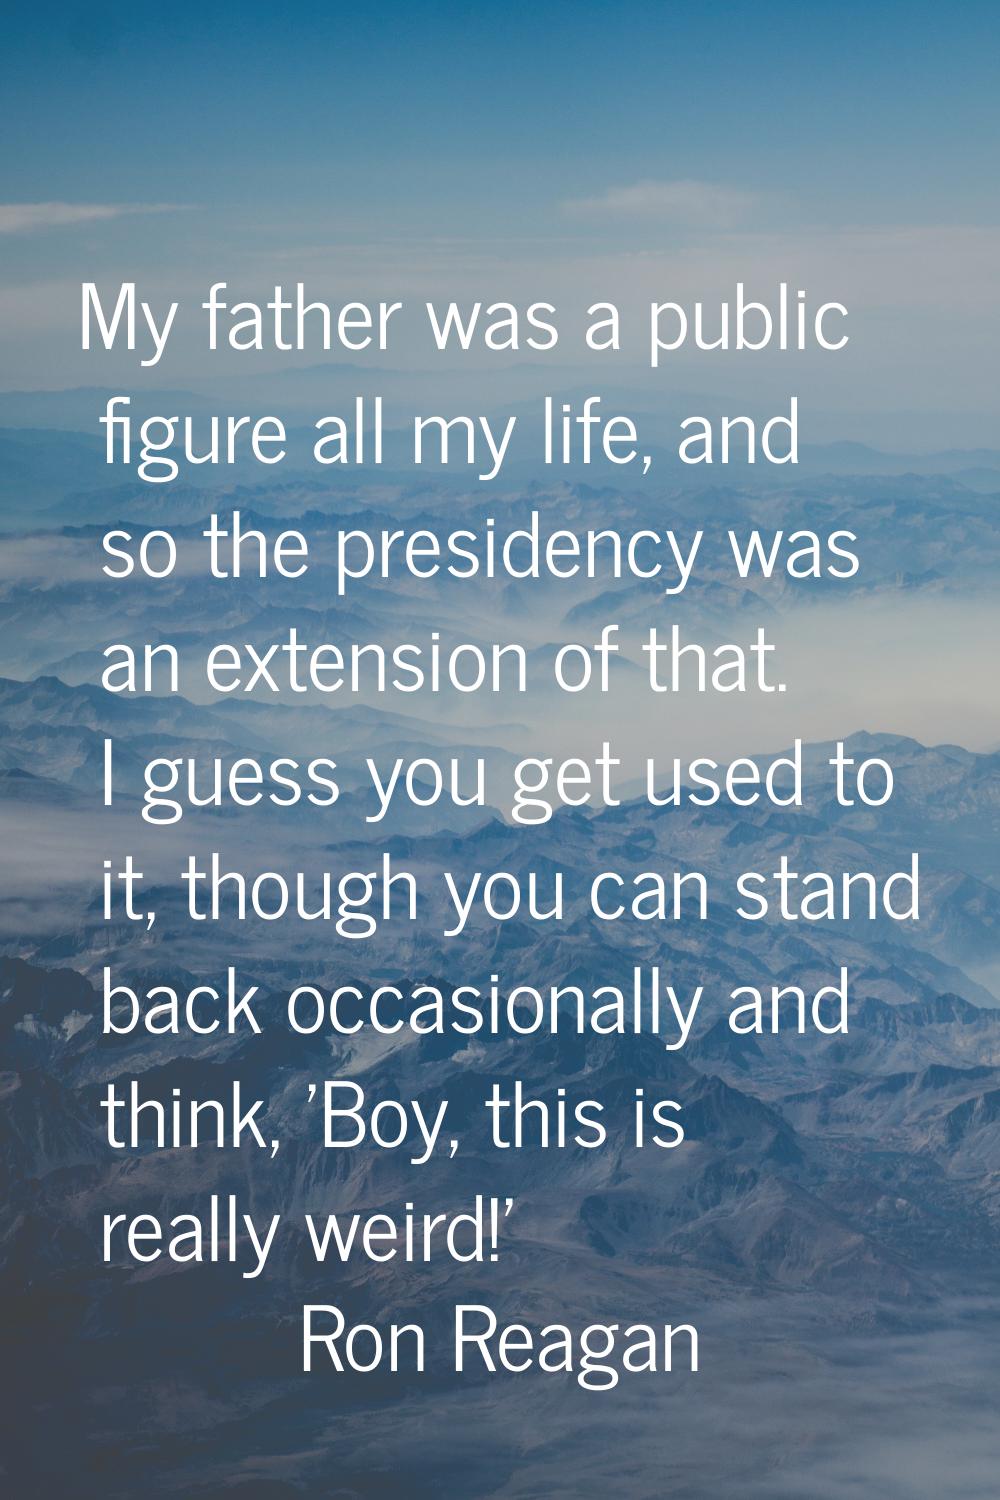 My father was a public figure all my life, and so the presidency was an extension of that. I guess 